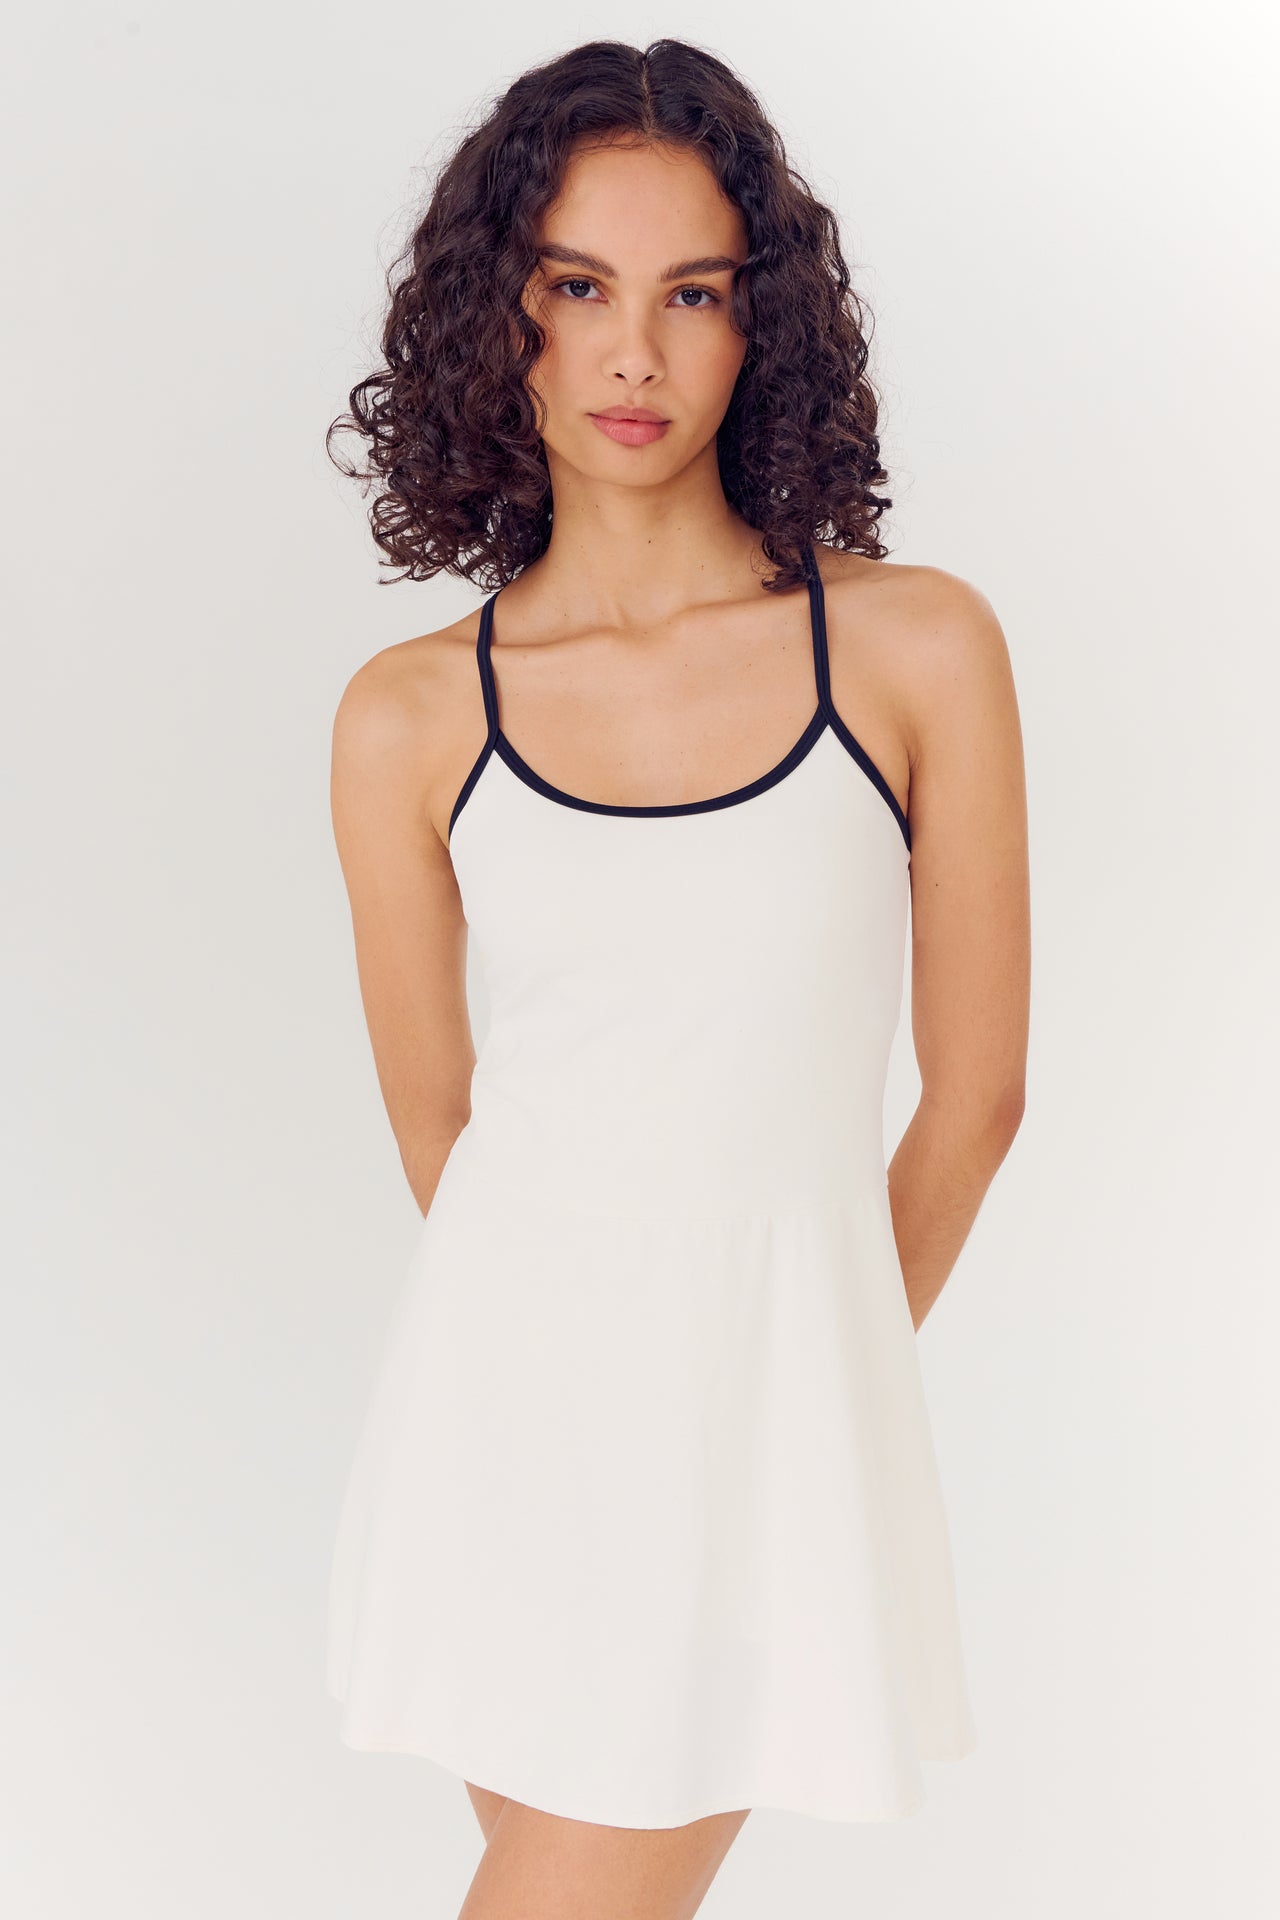 A woman in a Simona Airweight Tank Dress in White/Indigo by SPLITS59 with black trim stands against a plain background.